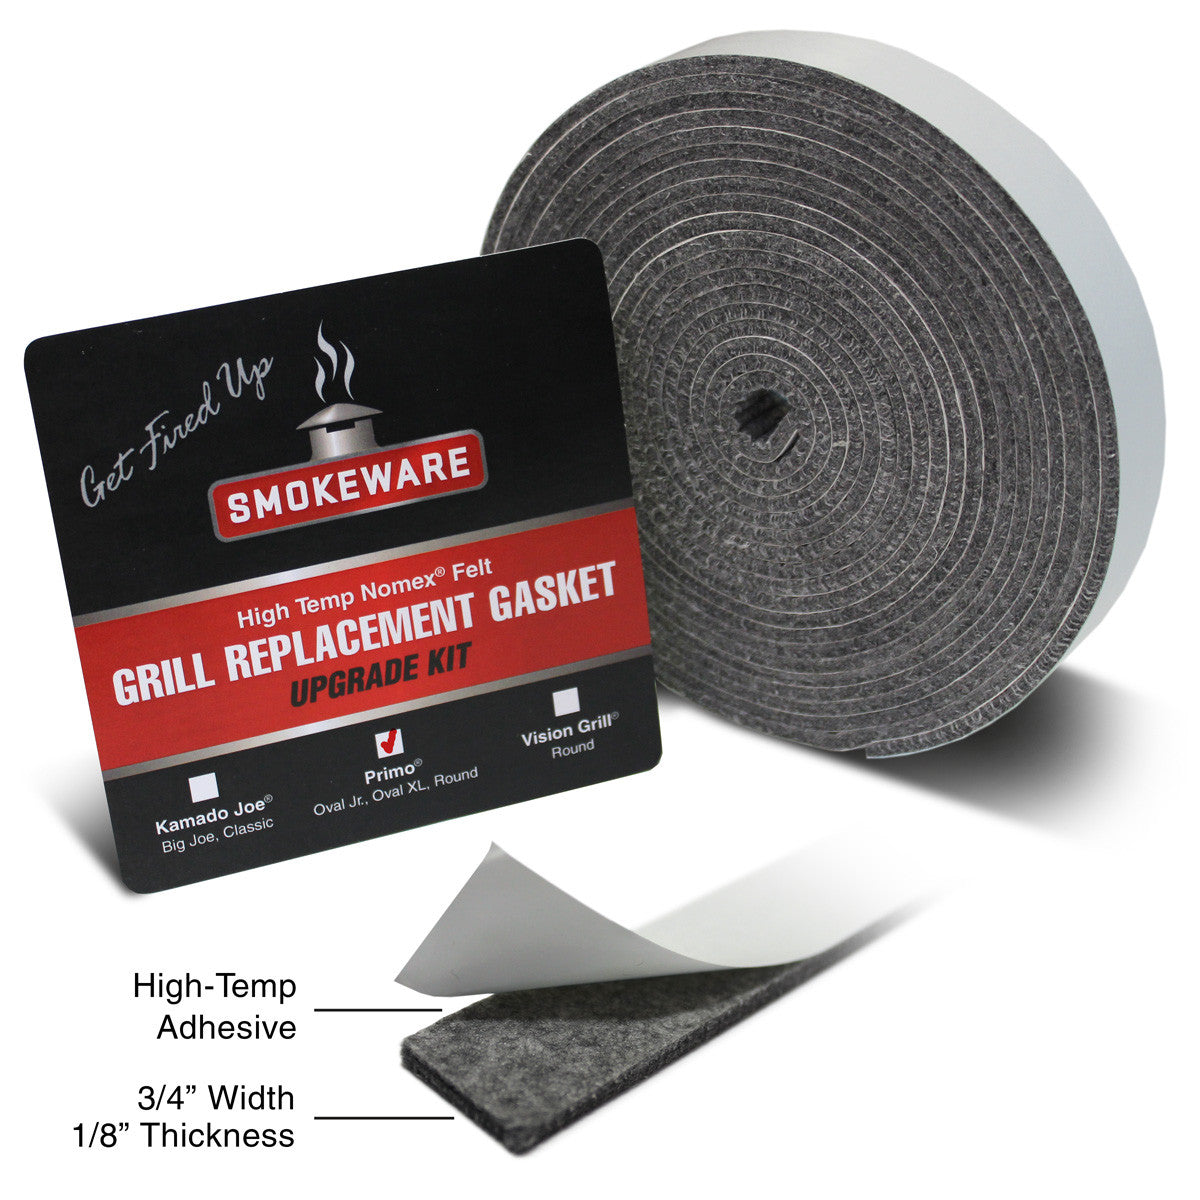 majs Erfaren person tub Nomex® High Temp. Felt Replacement Gaskets for Primo Grills - Smokeware